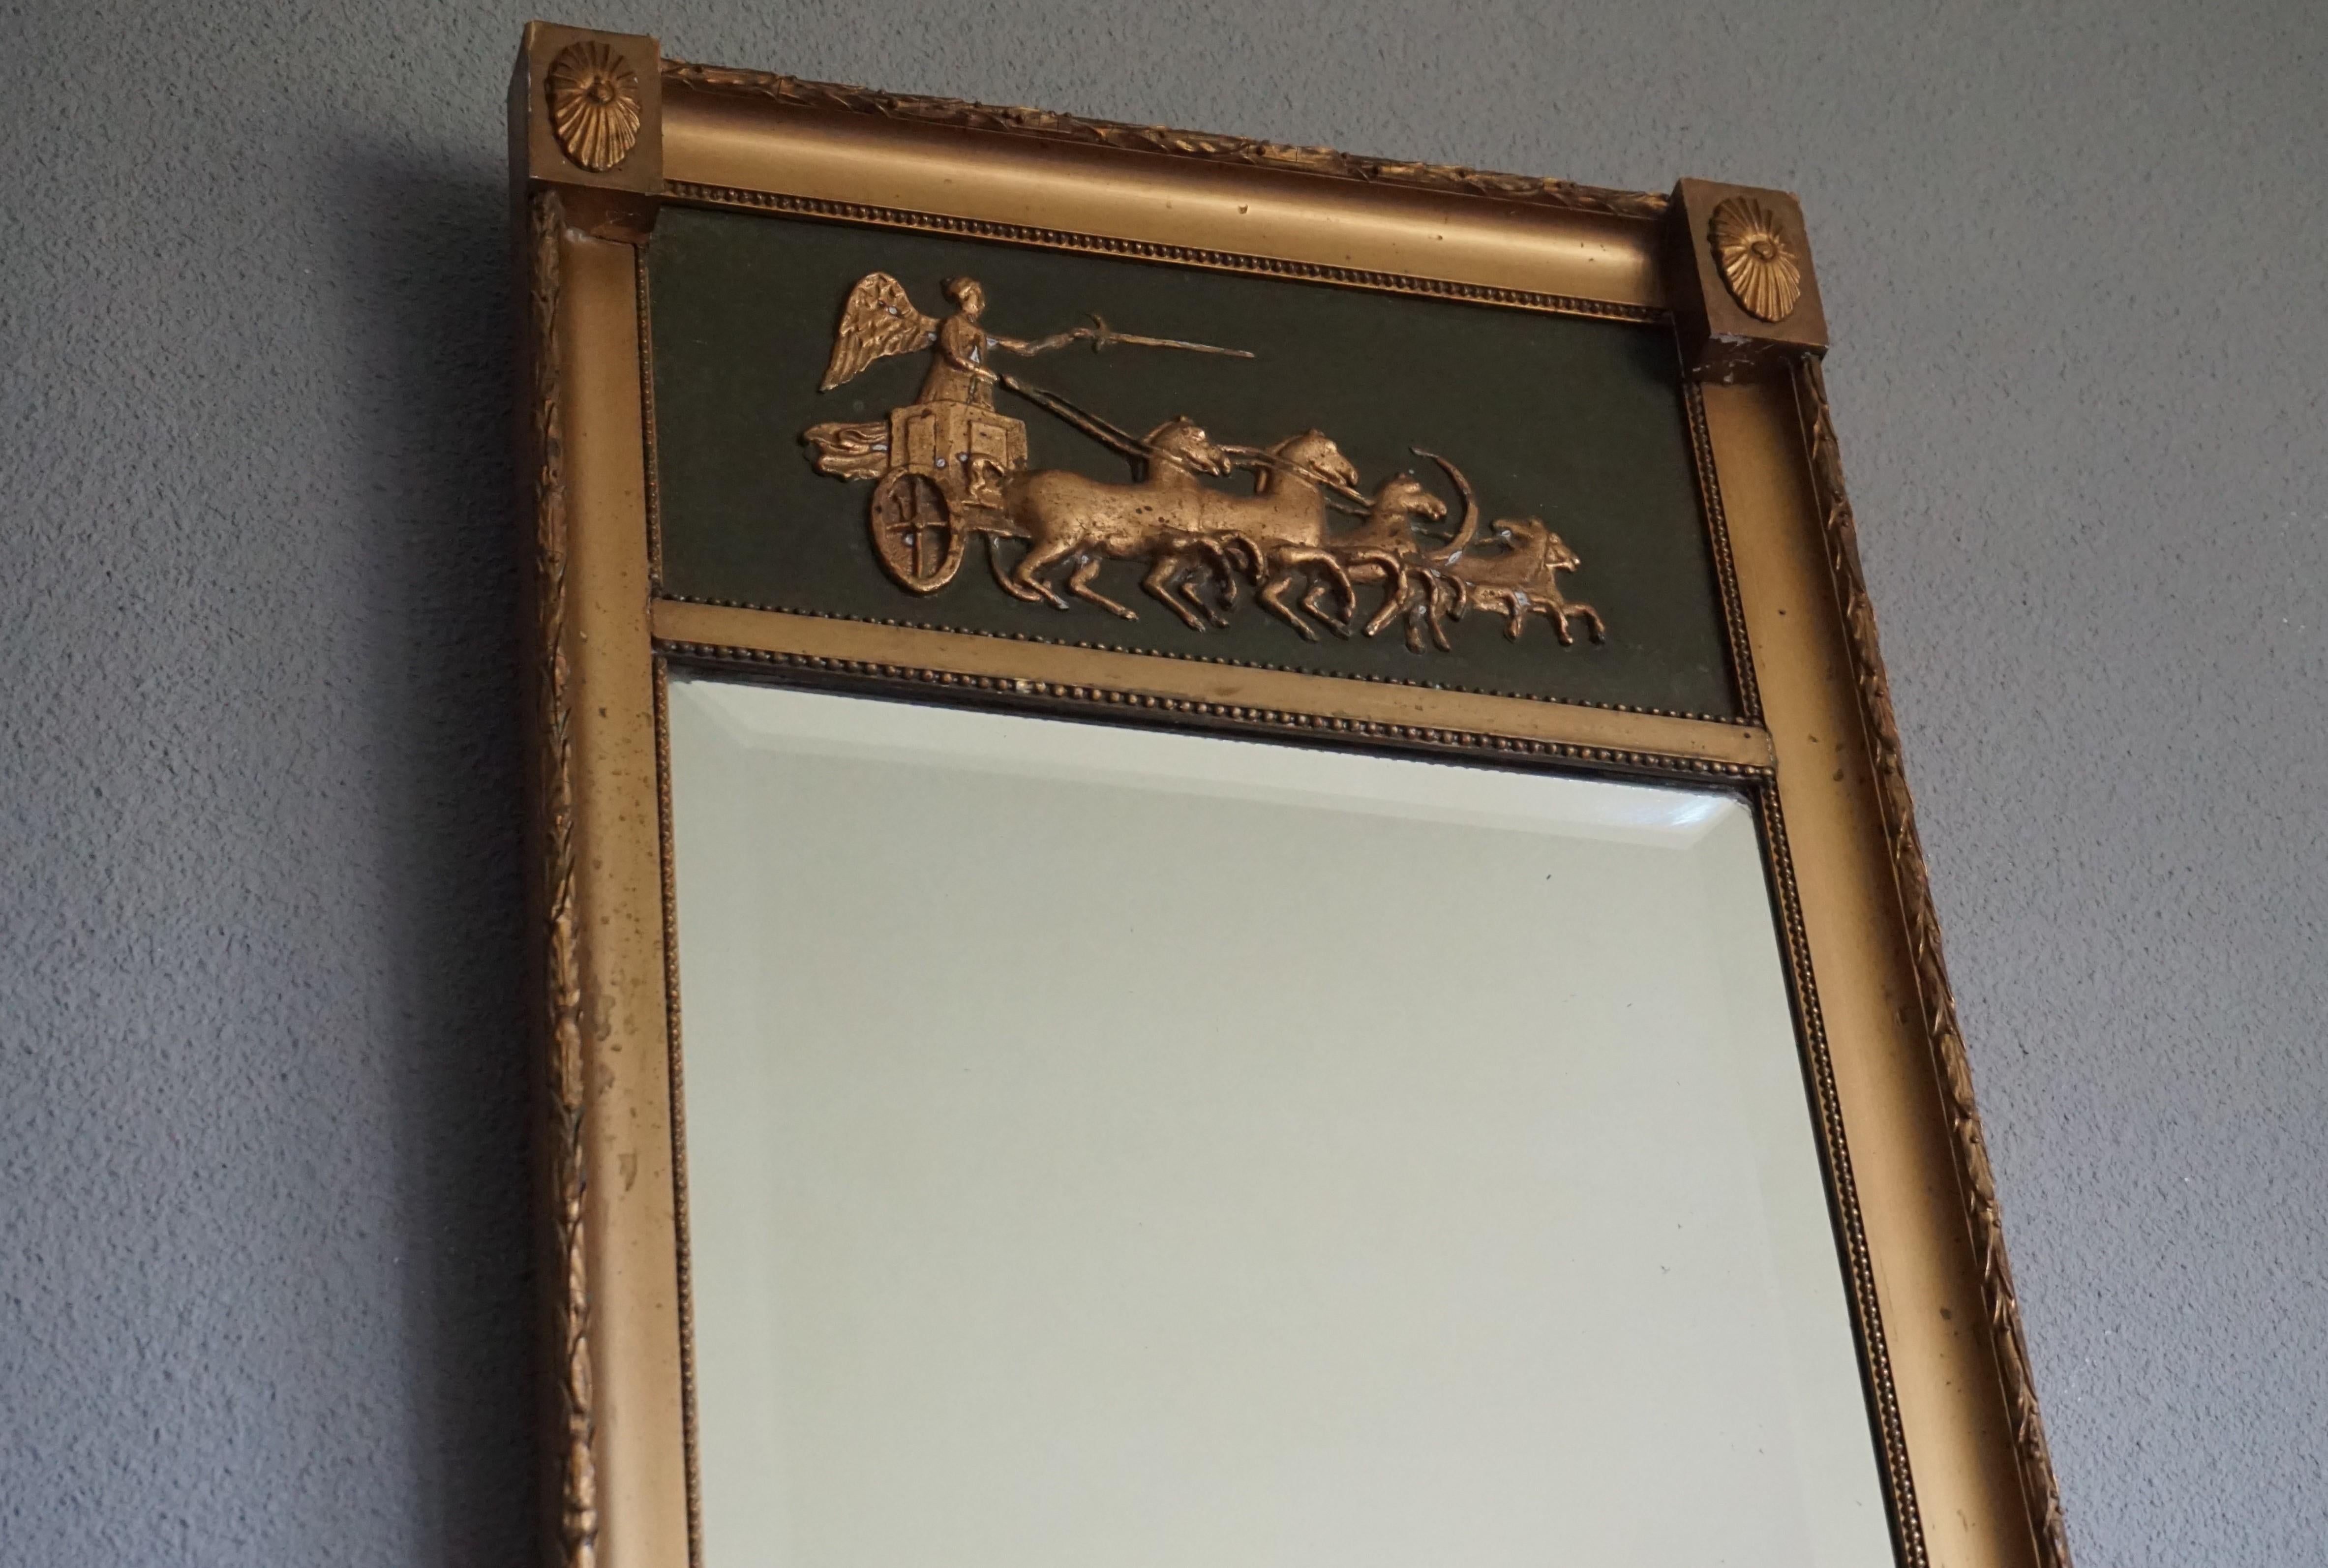 Handcrafted and practical size, 19th century wall mirror.

We have a number of beautiful antique mirrors and this is our latest find, but somehow we always have problems shooting photos that do them justice. In real life they always look so much